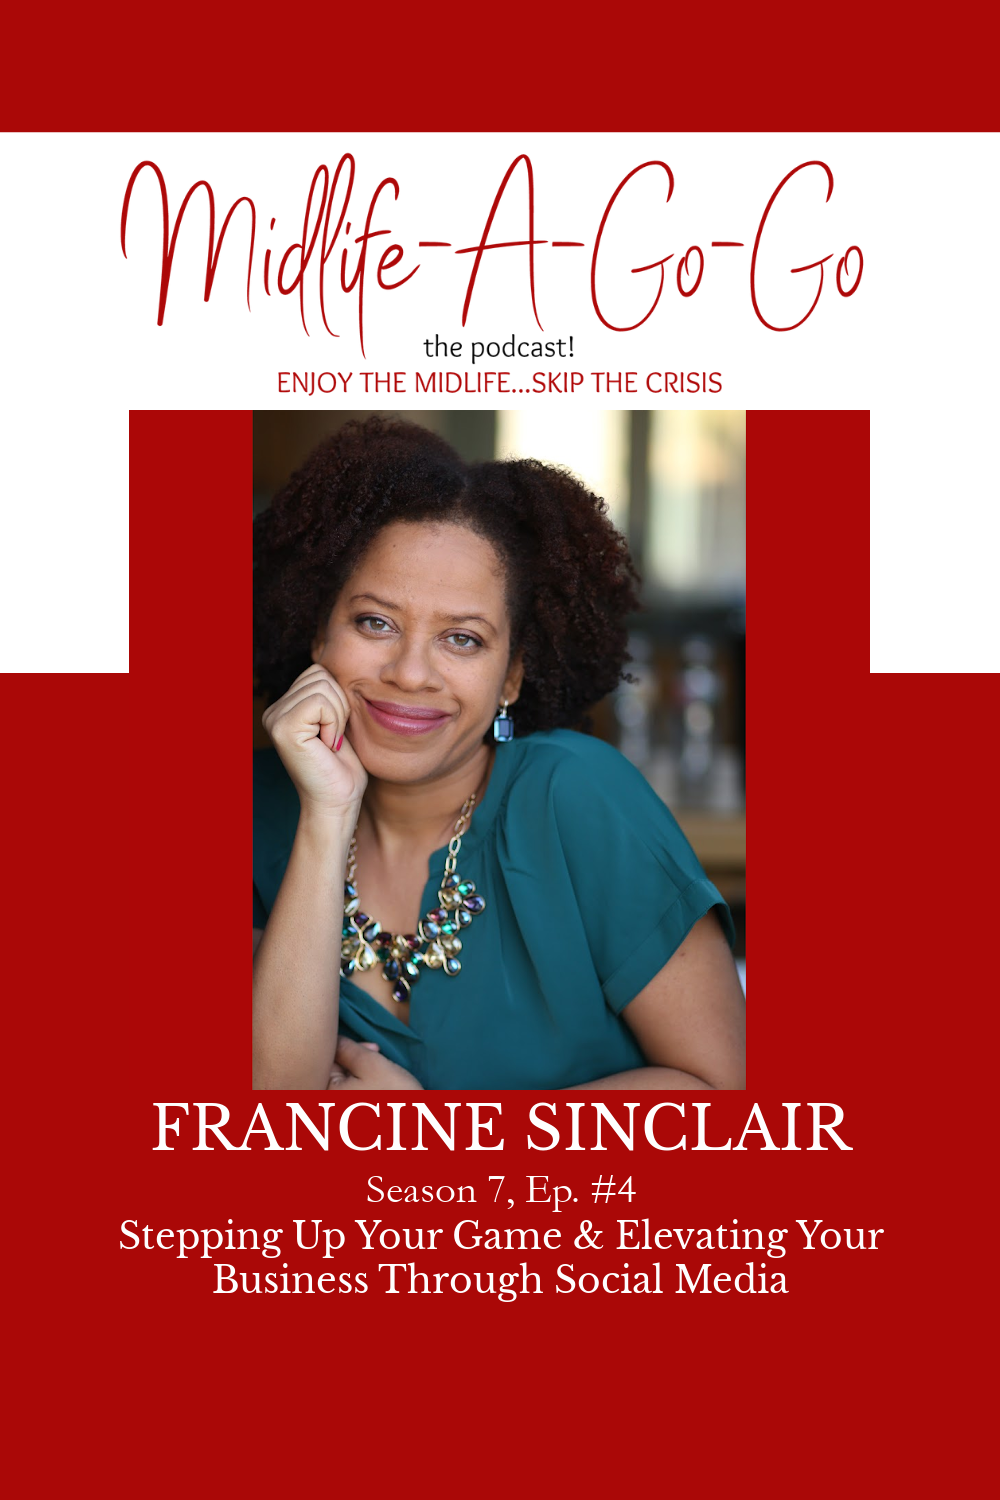 Stepping Up Your Game & Elevating Your Business Through Social Media with Francine Sinclair